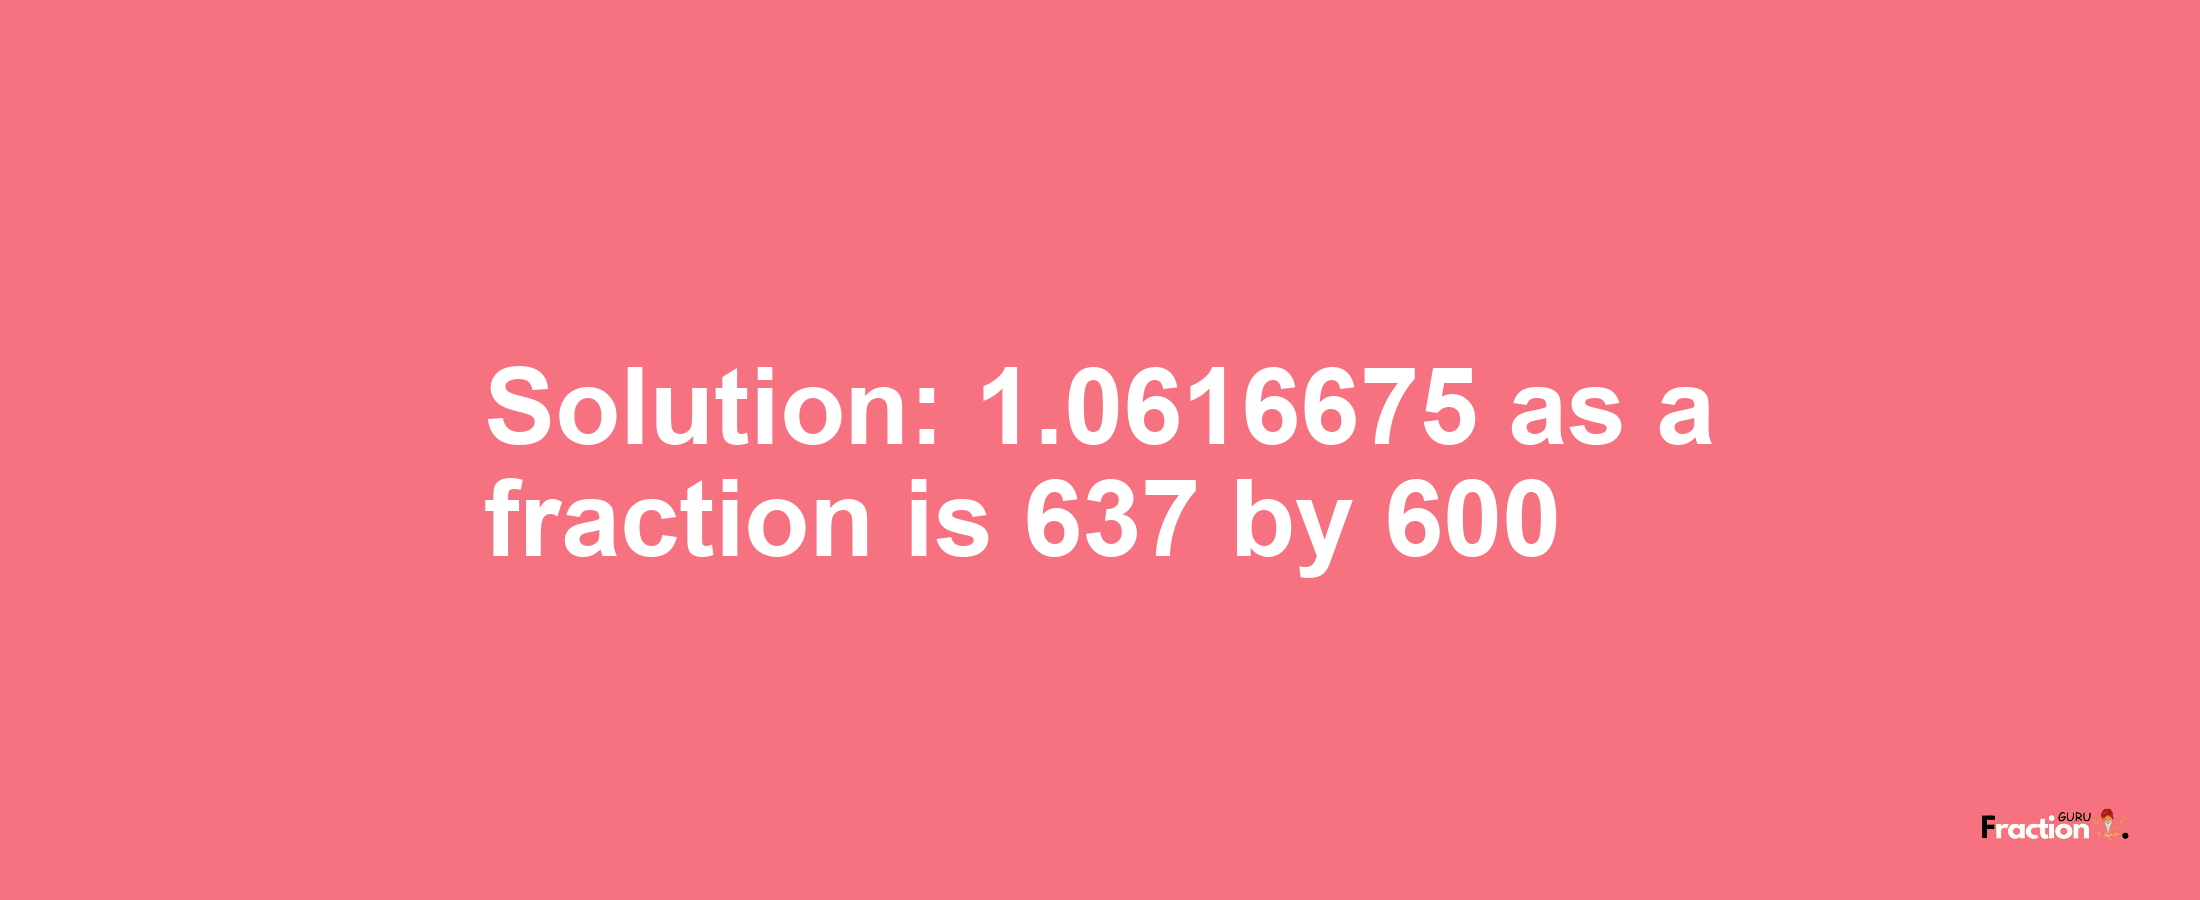 Solution:1.0616675 as a fraction is 637/600